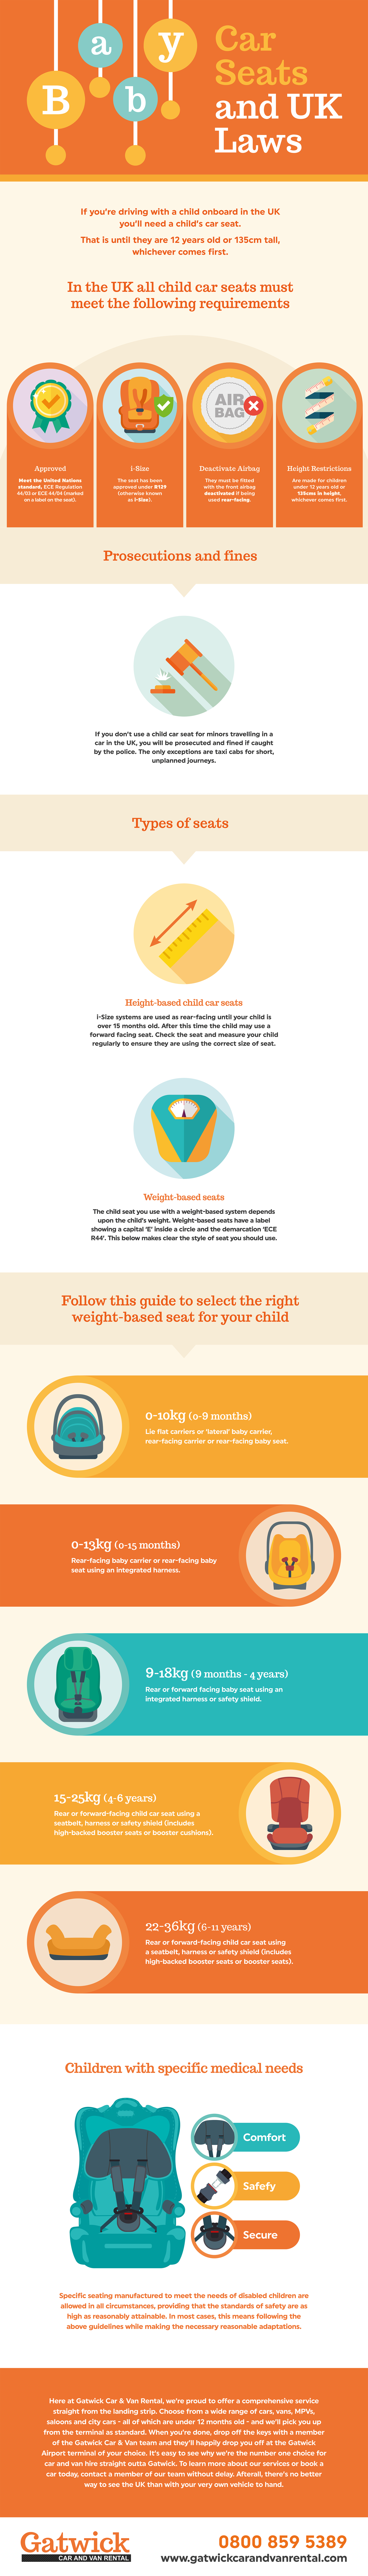 What Are The Baby Car Seats Laws In, What Is The Uk Law On Child Car Seats